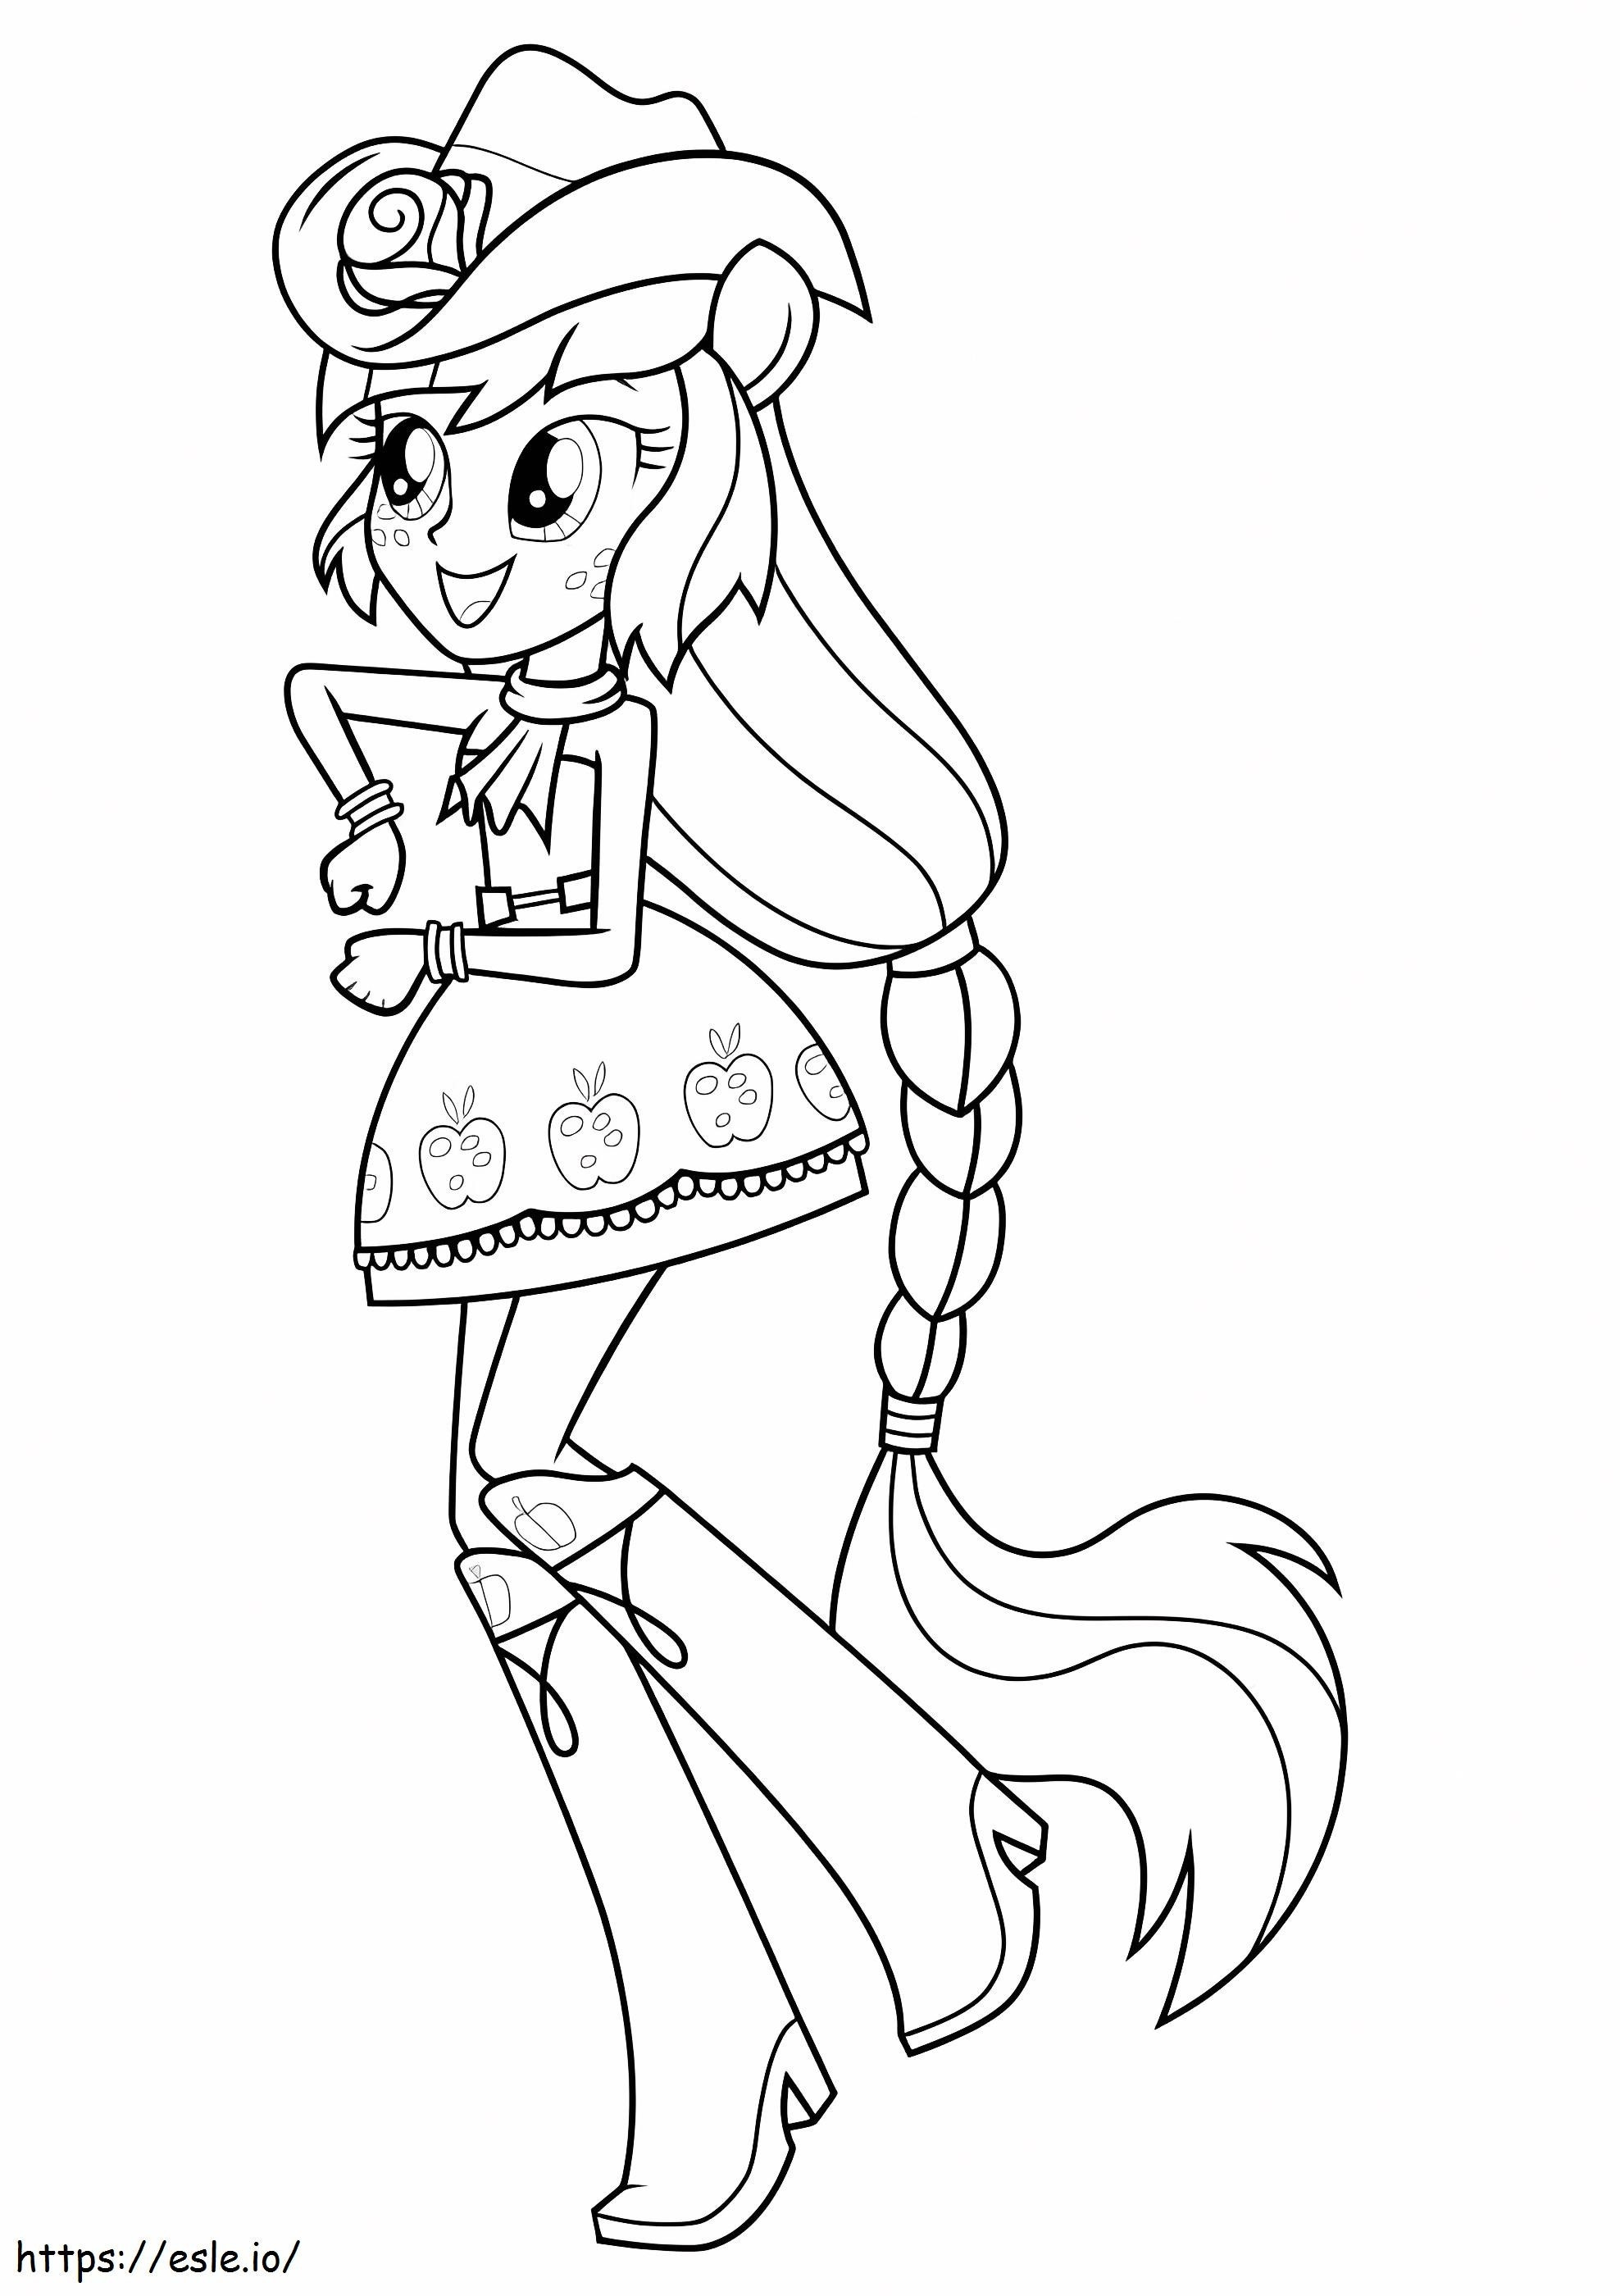 Applejack In Equestria Girls coloring page